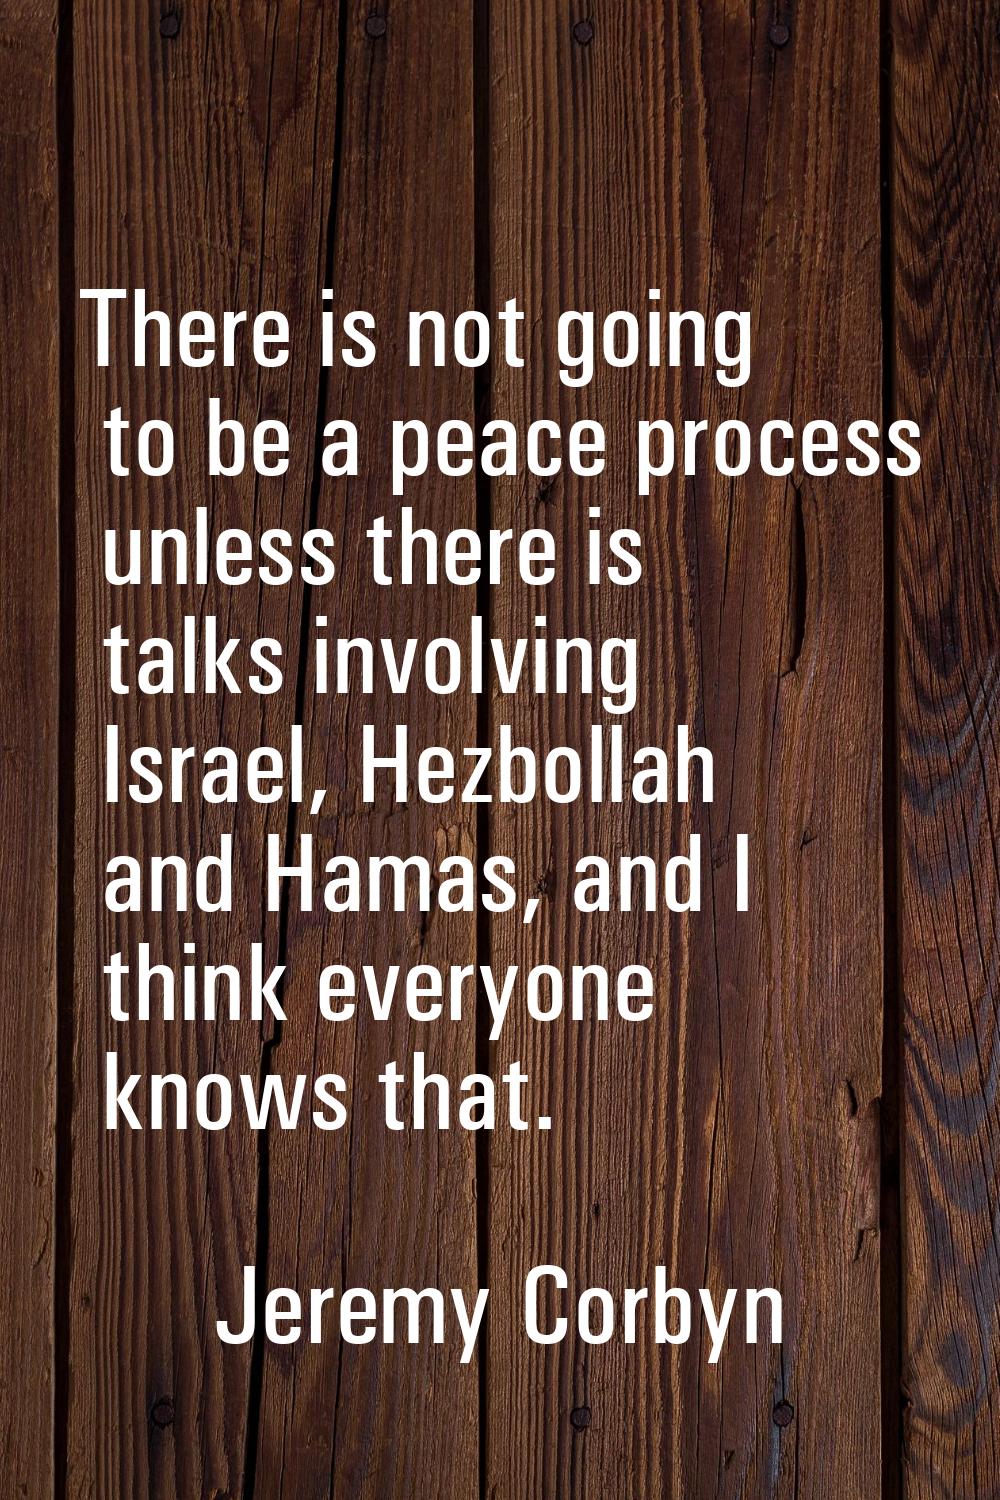 There is not going to be a peace process unless there is talks involving Israel, Hezbollah and Hama